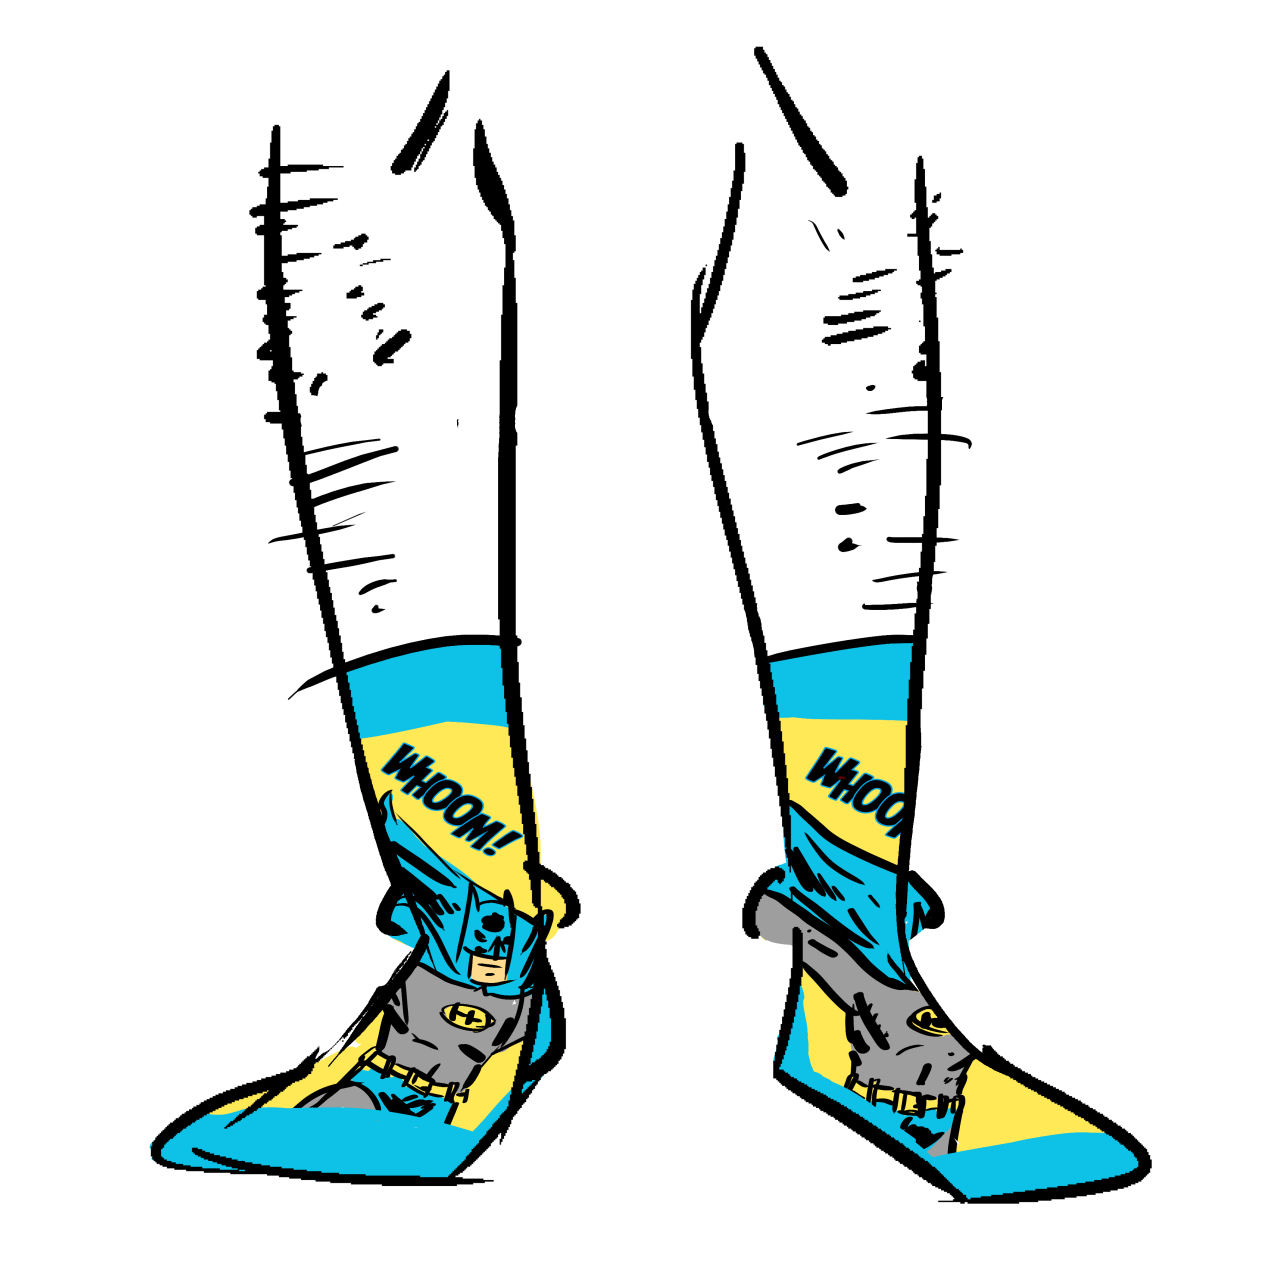 Blue and yellow socks showing Batman and the sound effect "Badoom!"